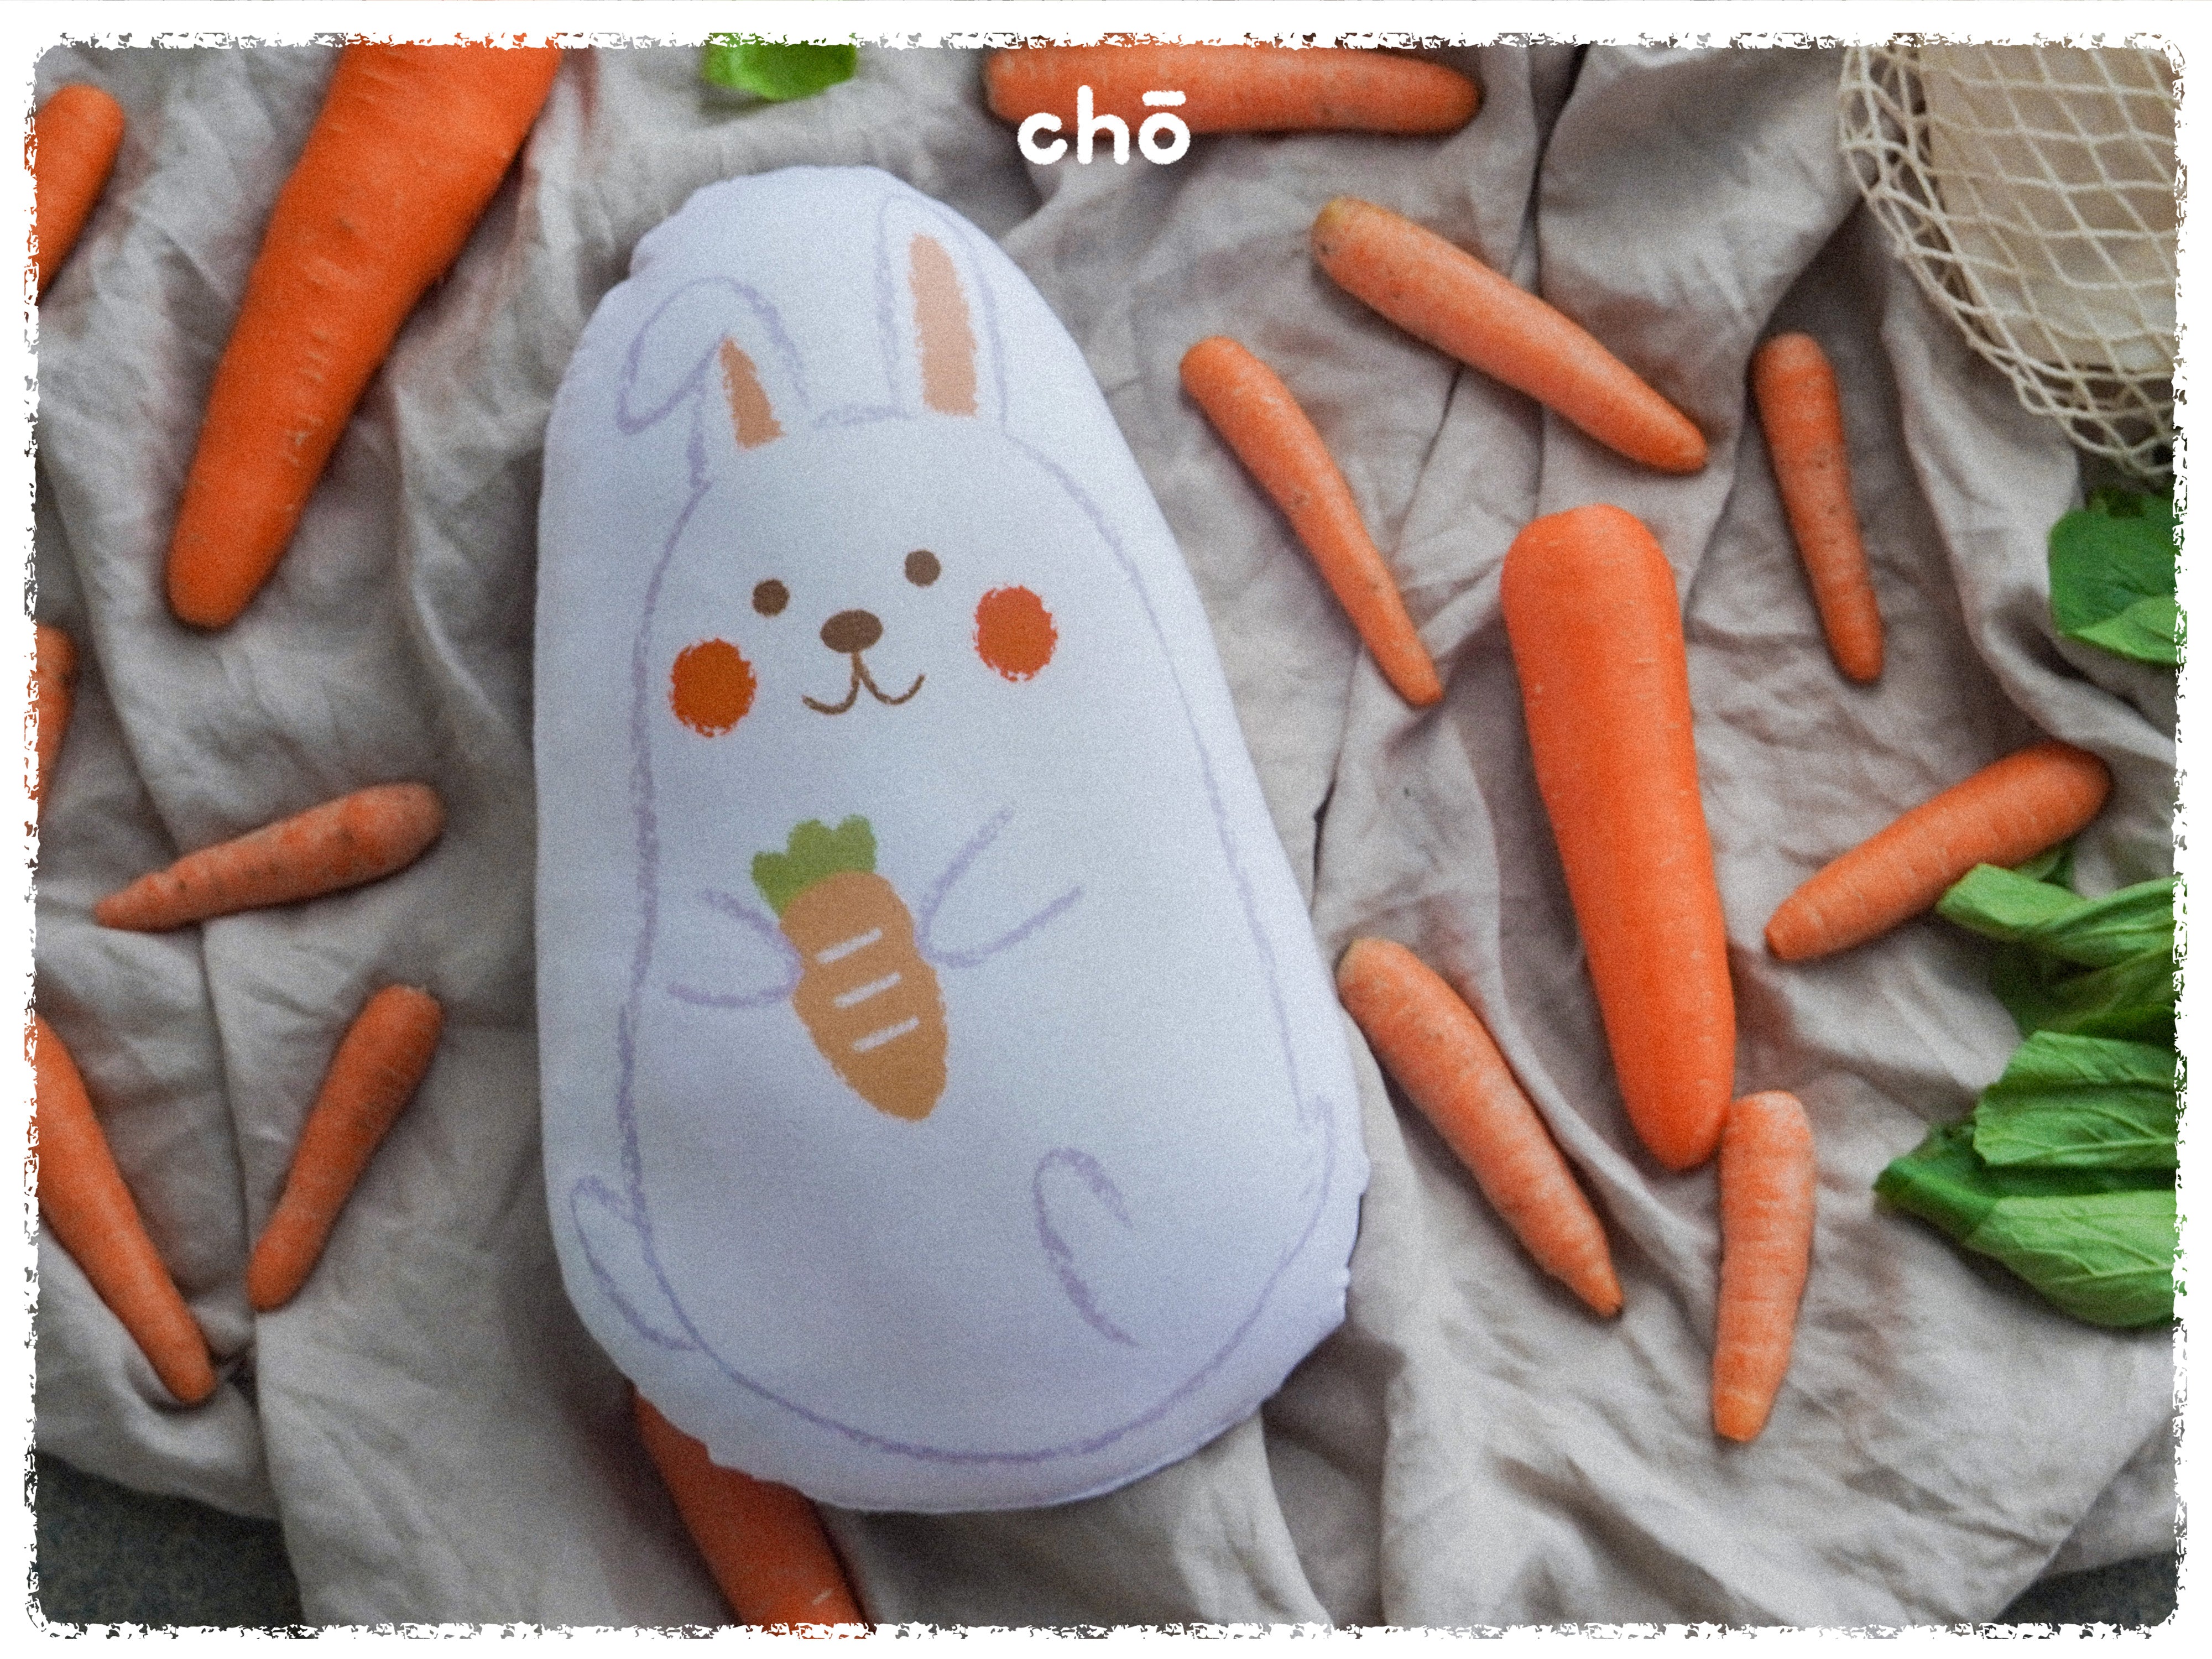 nom nom momo snuggy plushie cushion and a bed of carrots